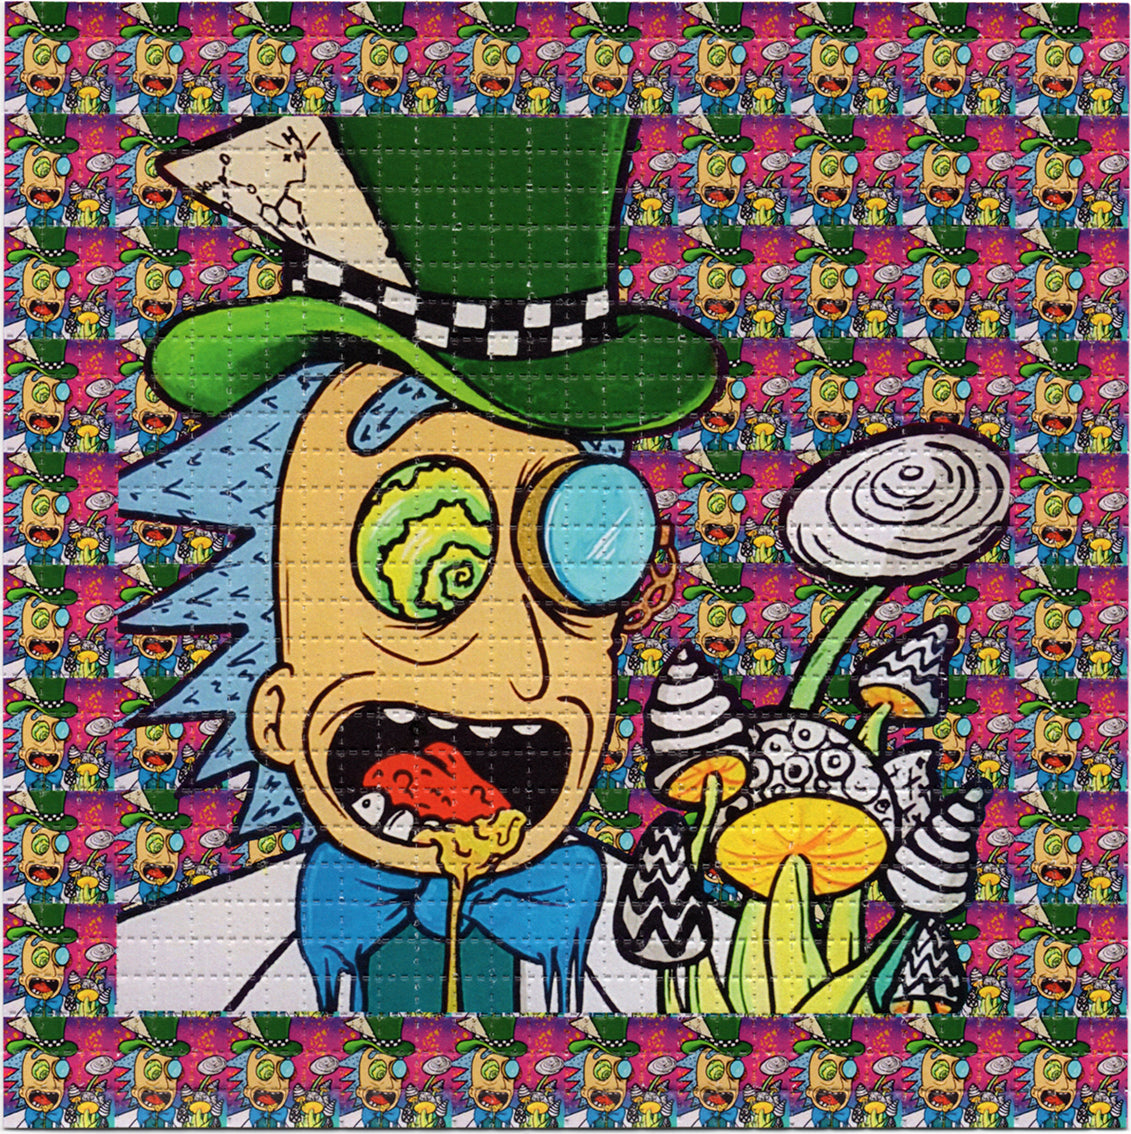 Mad Hatter Rick by Overdosed Art (Russ Holmes) Limited Edition LSD blotter art print